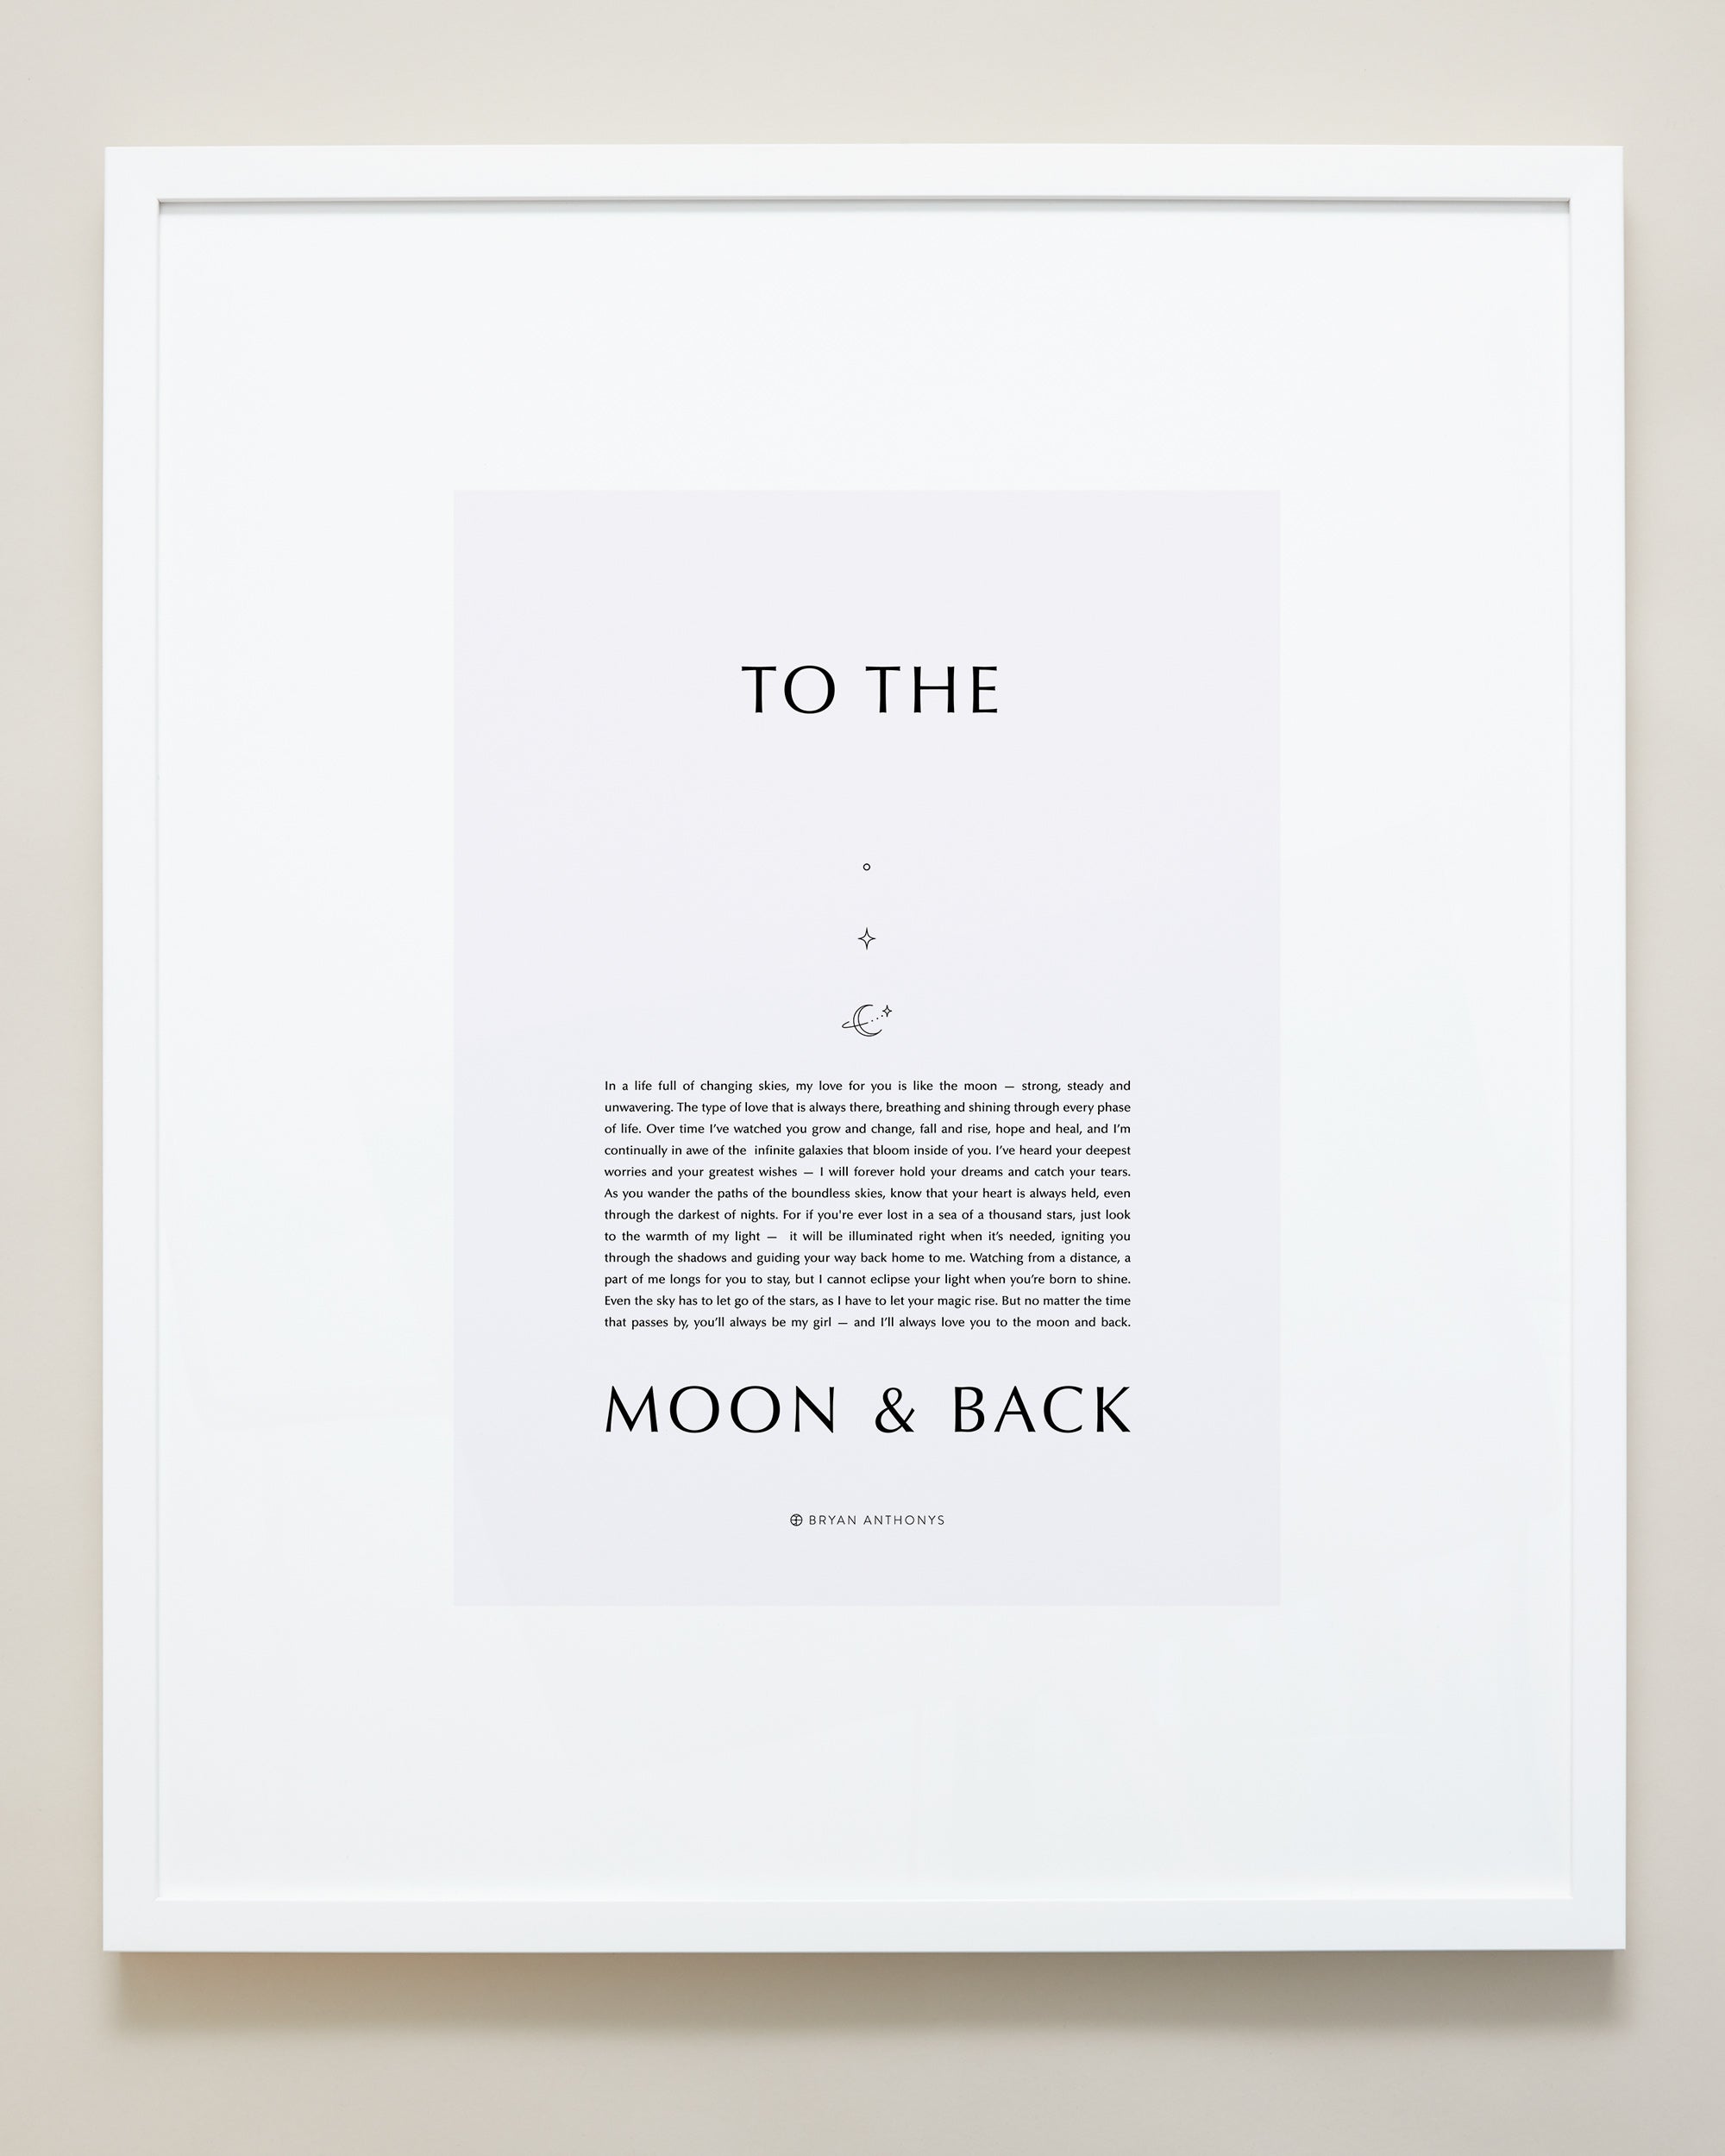 Bryan Anthonys Home Decor Framed Print To The Moon & Back White Frame w/ Gray 20x24